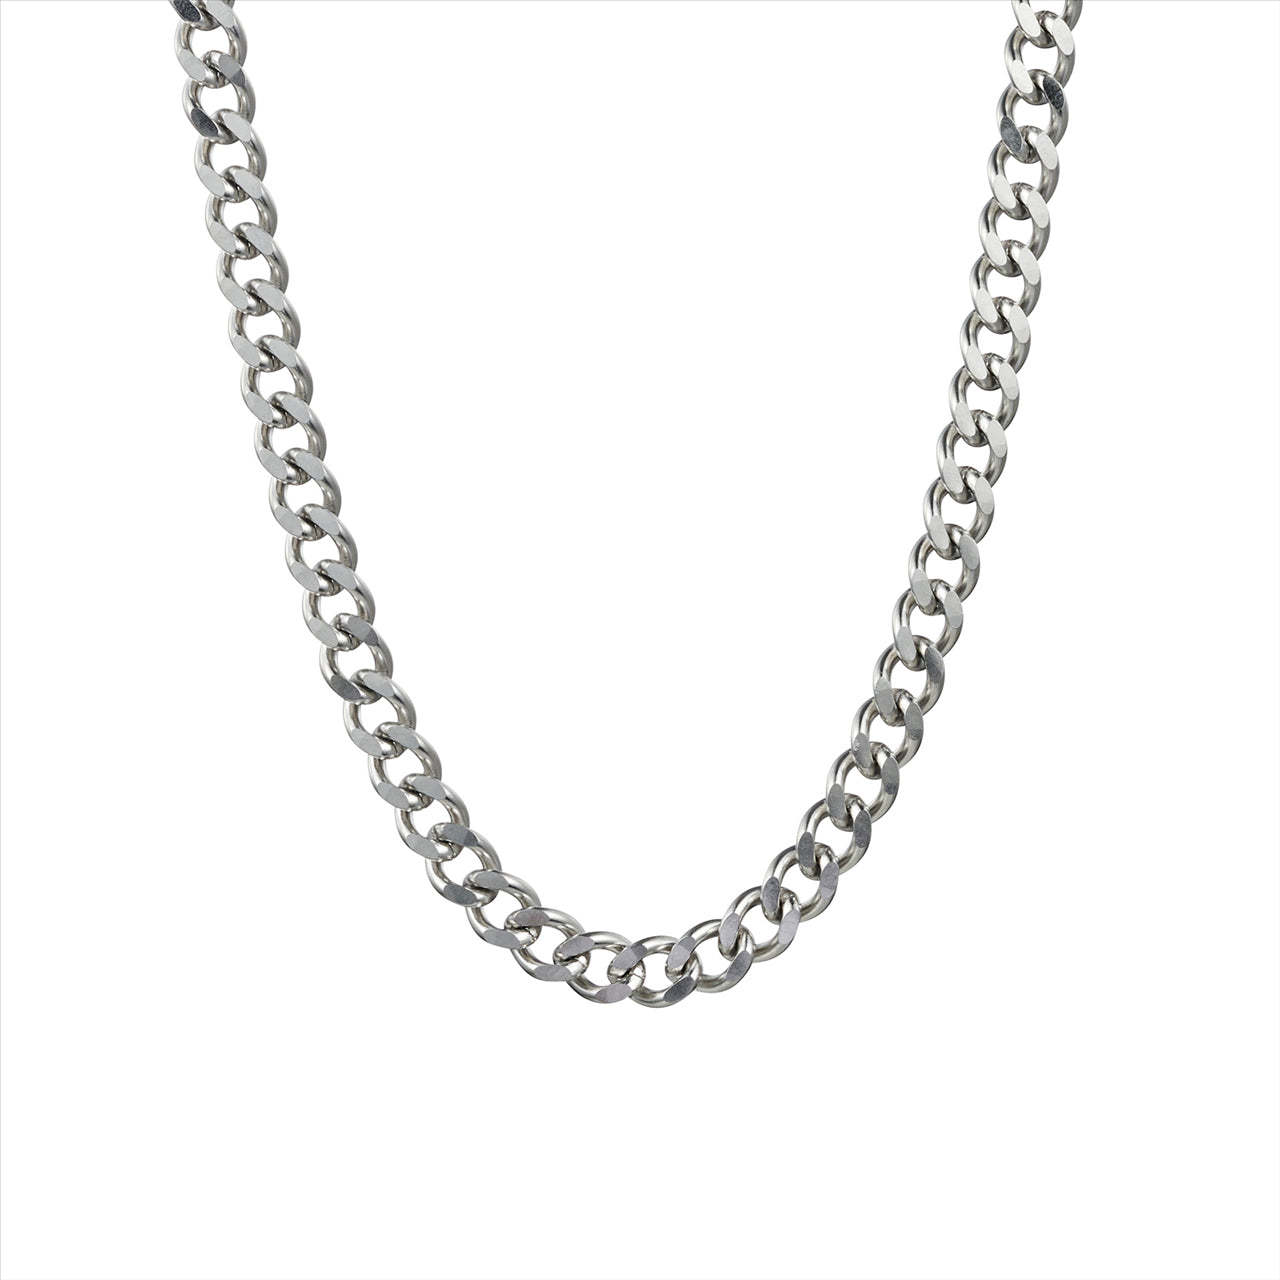 Stainless Steel Curb Link Neck Chain